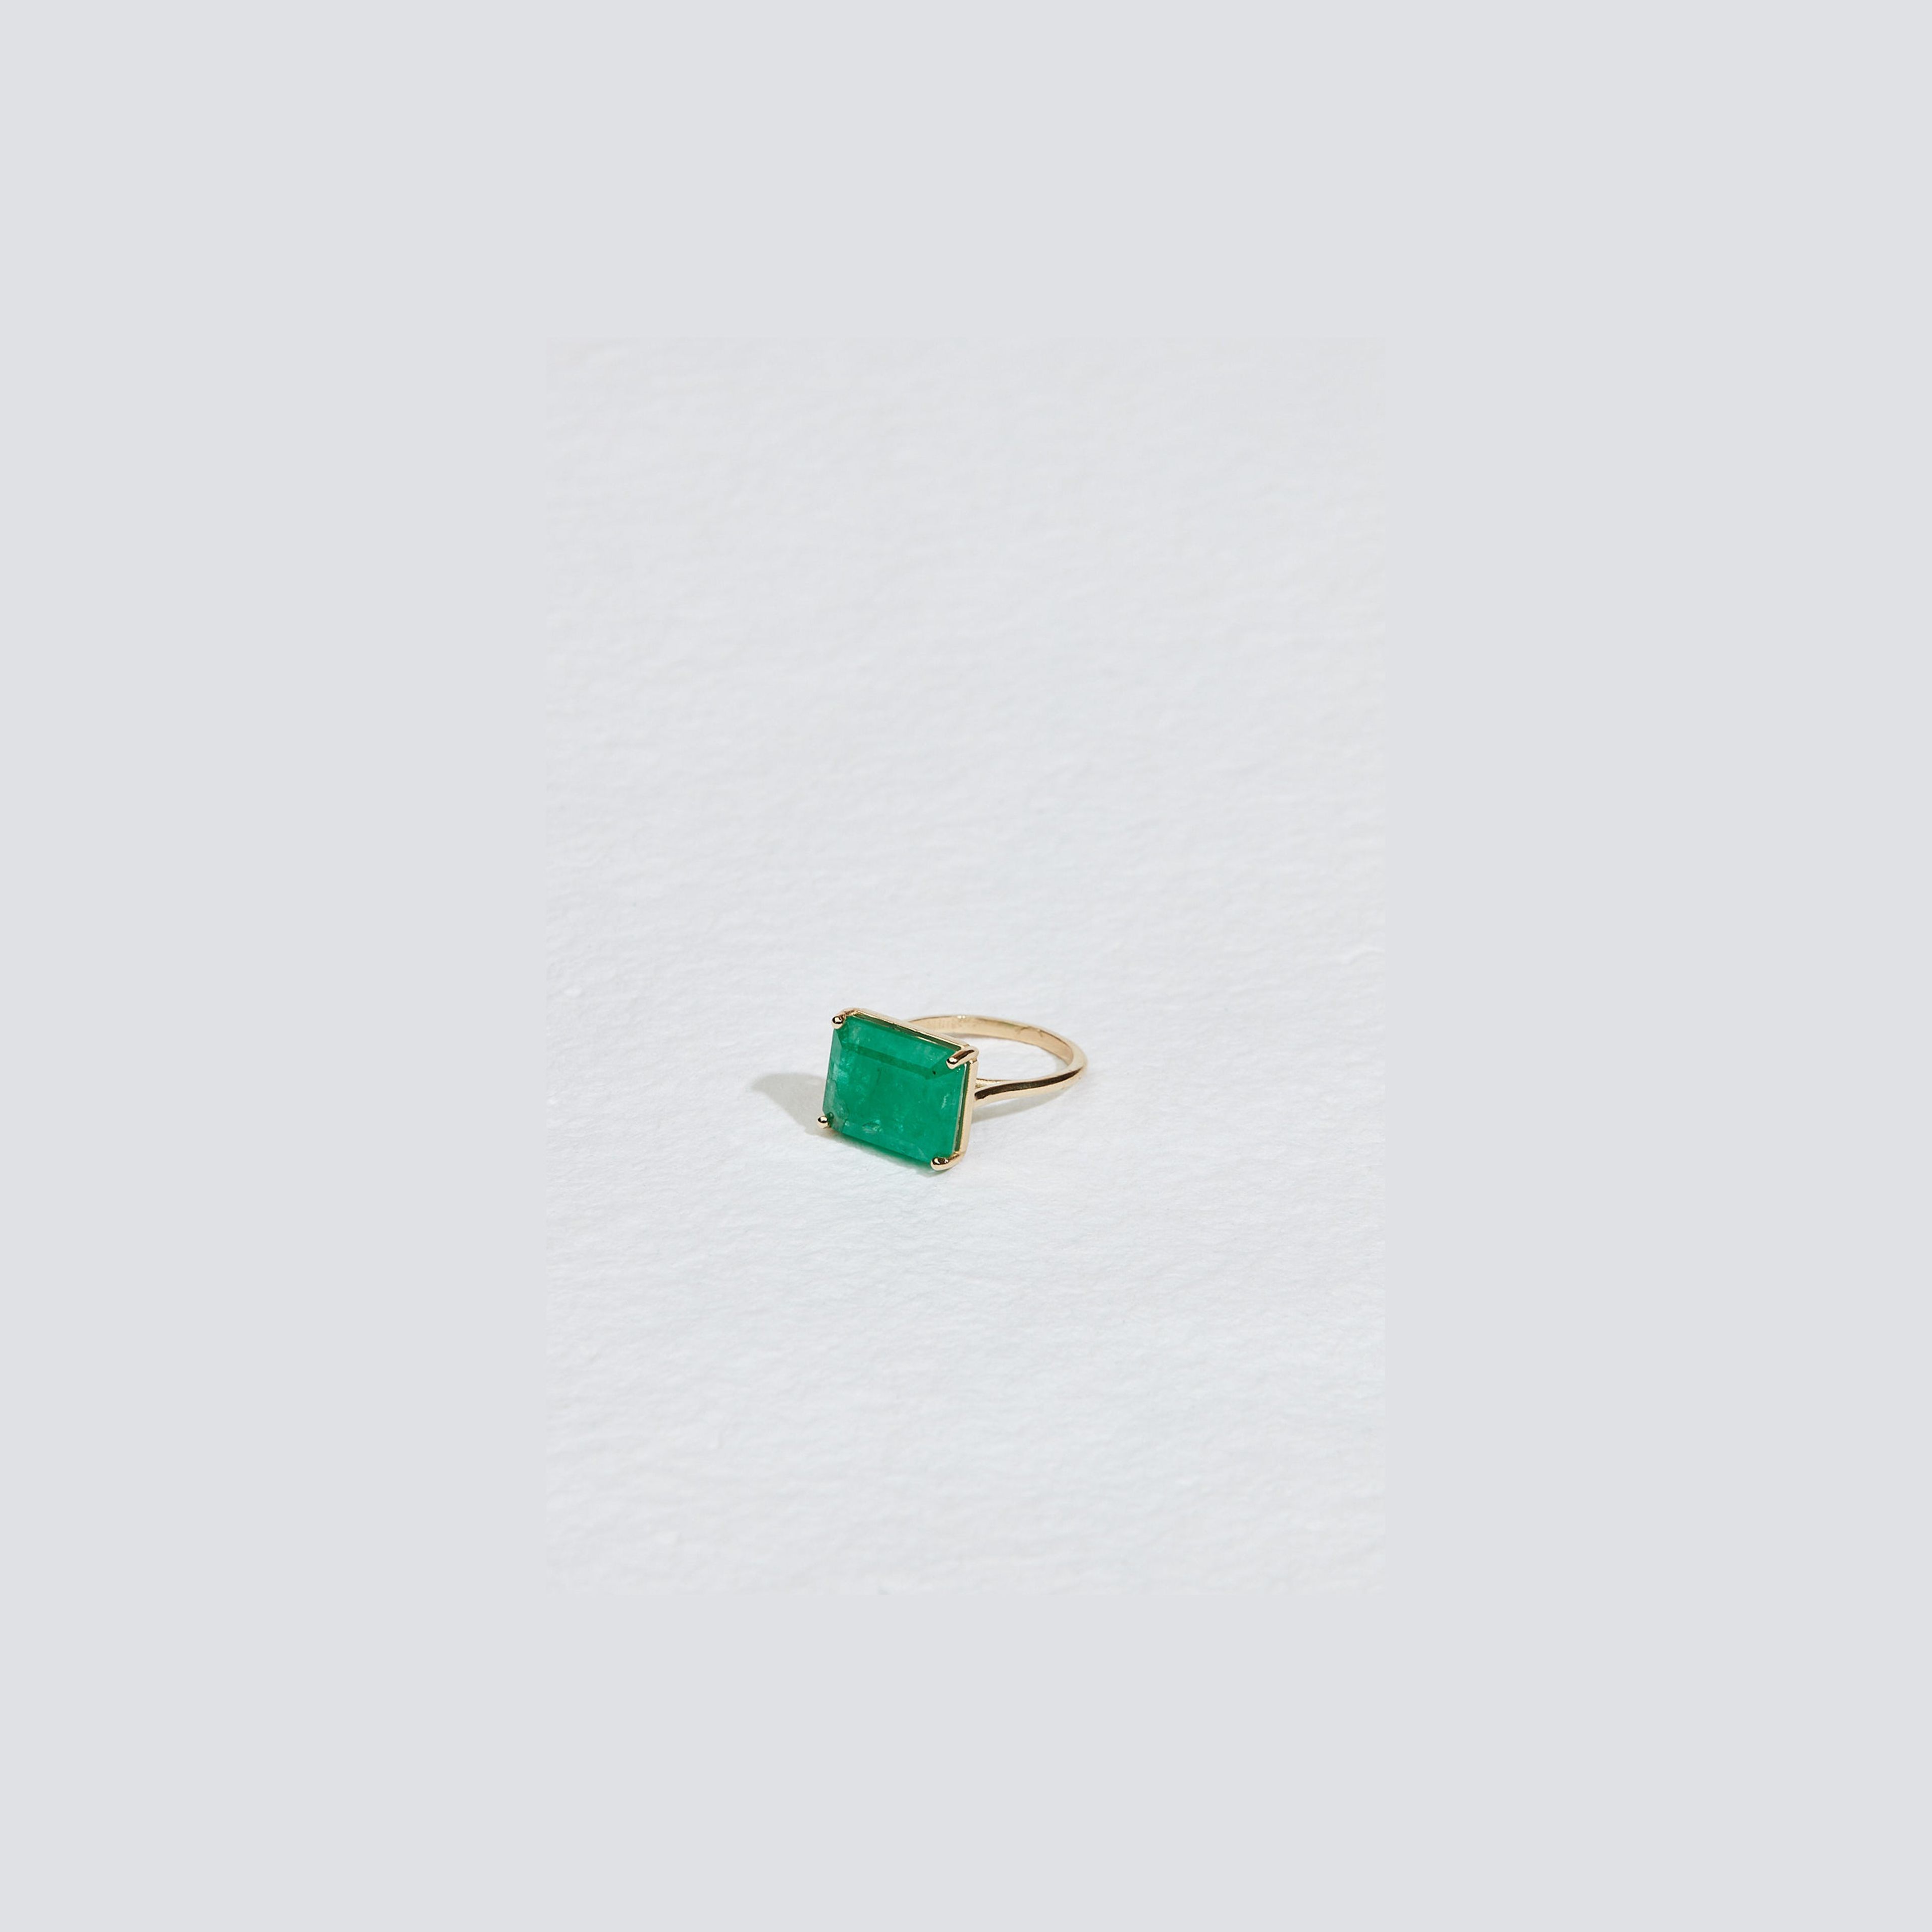 JP FOUR PRONG EMERALD RING - 7.87ct